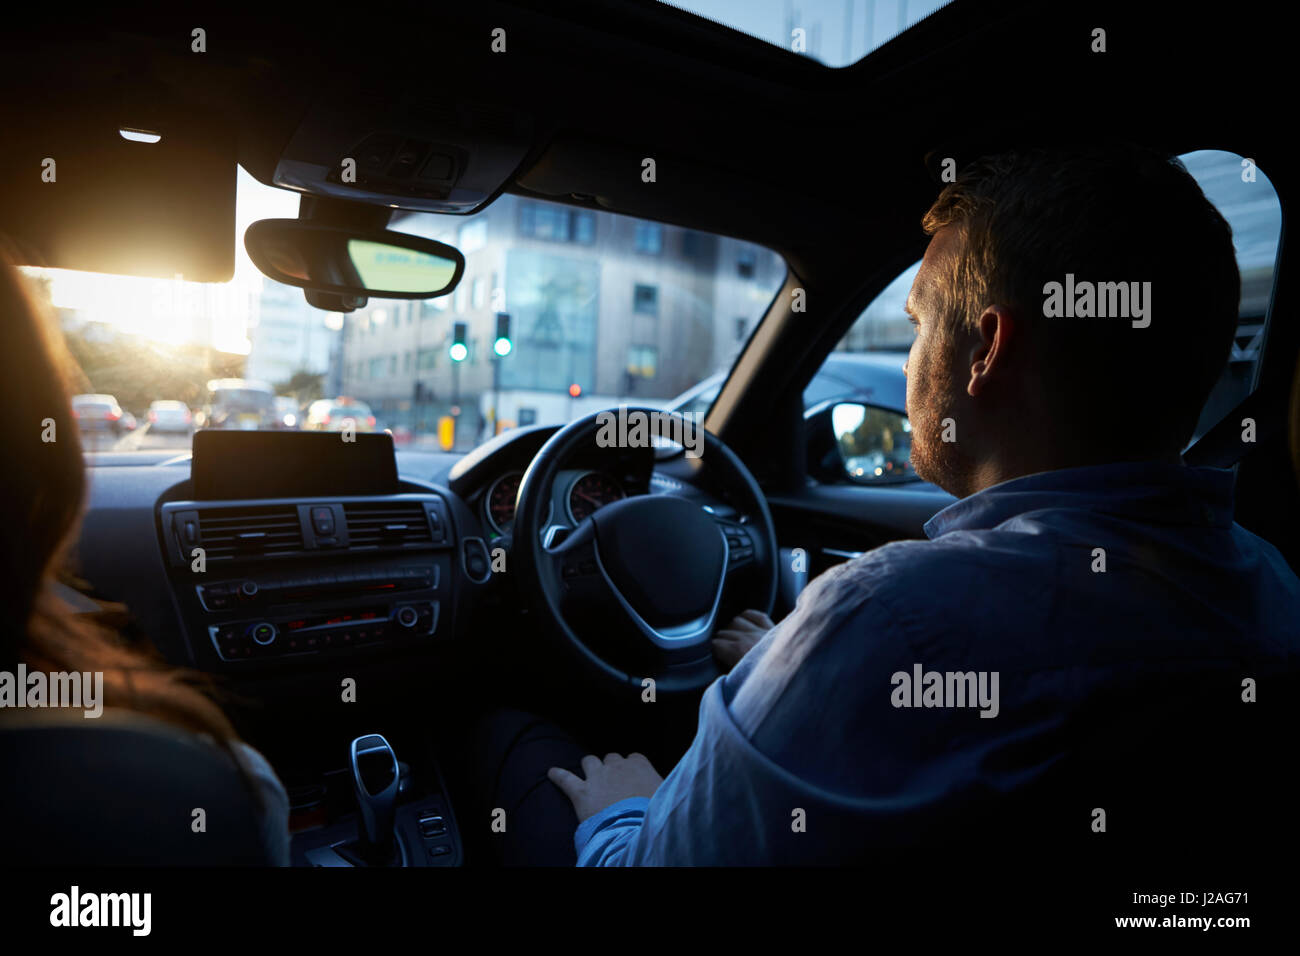 Over shoulder view of couple in car driving in the city Stock Photo